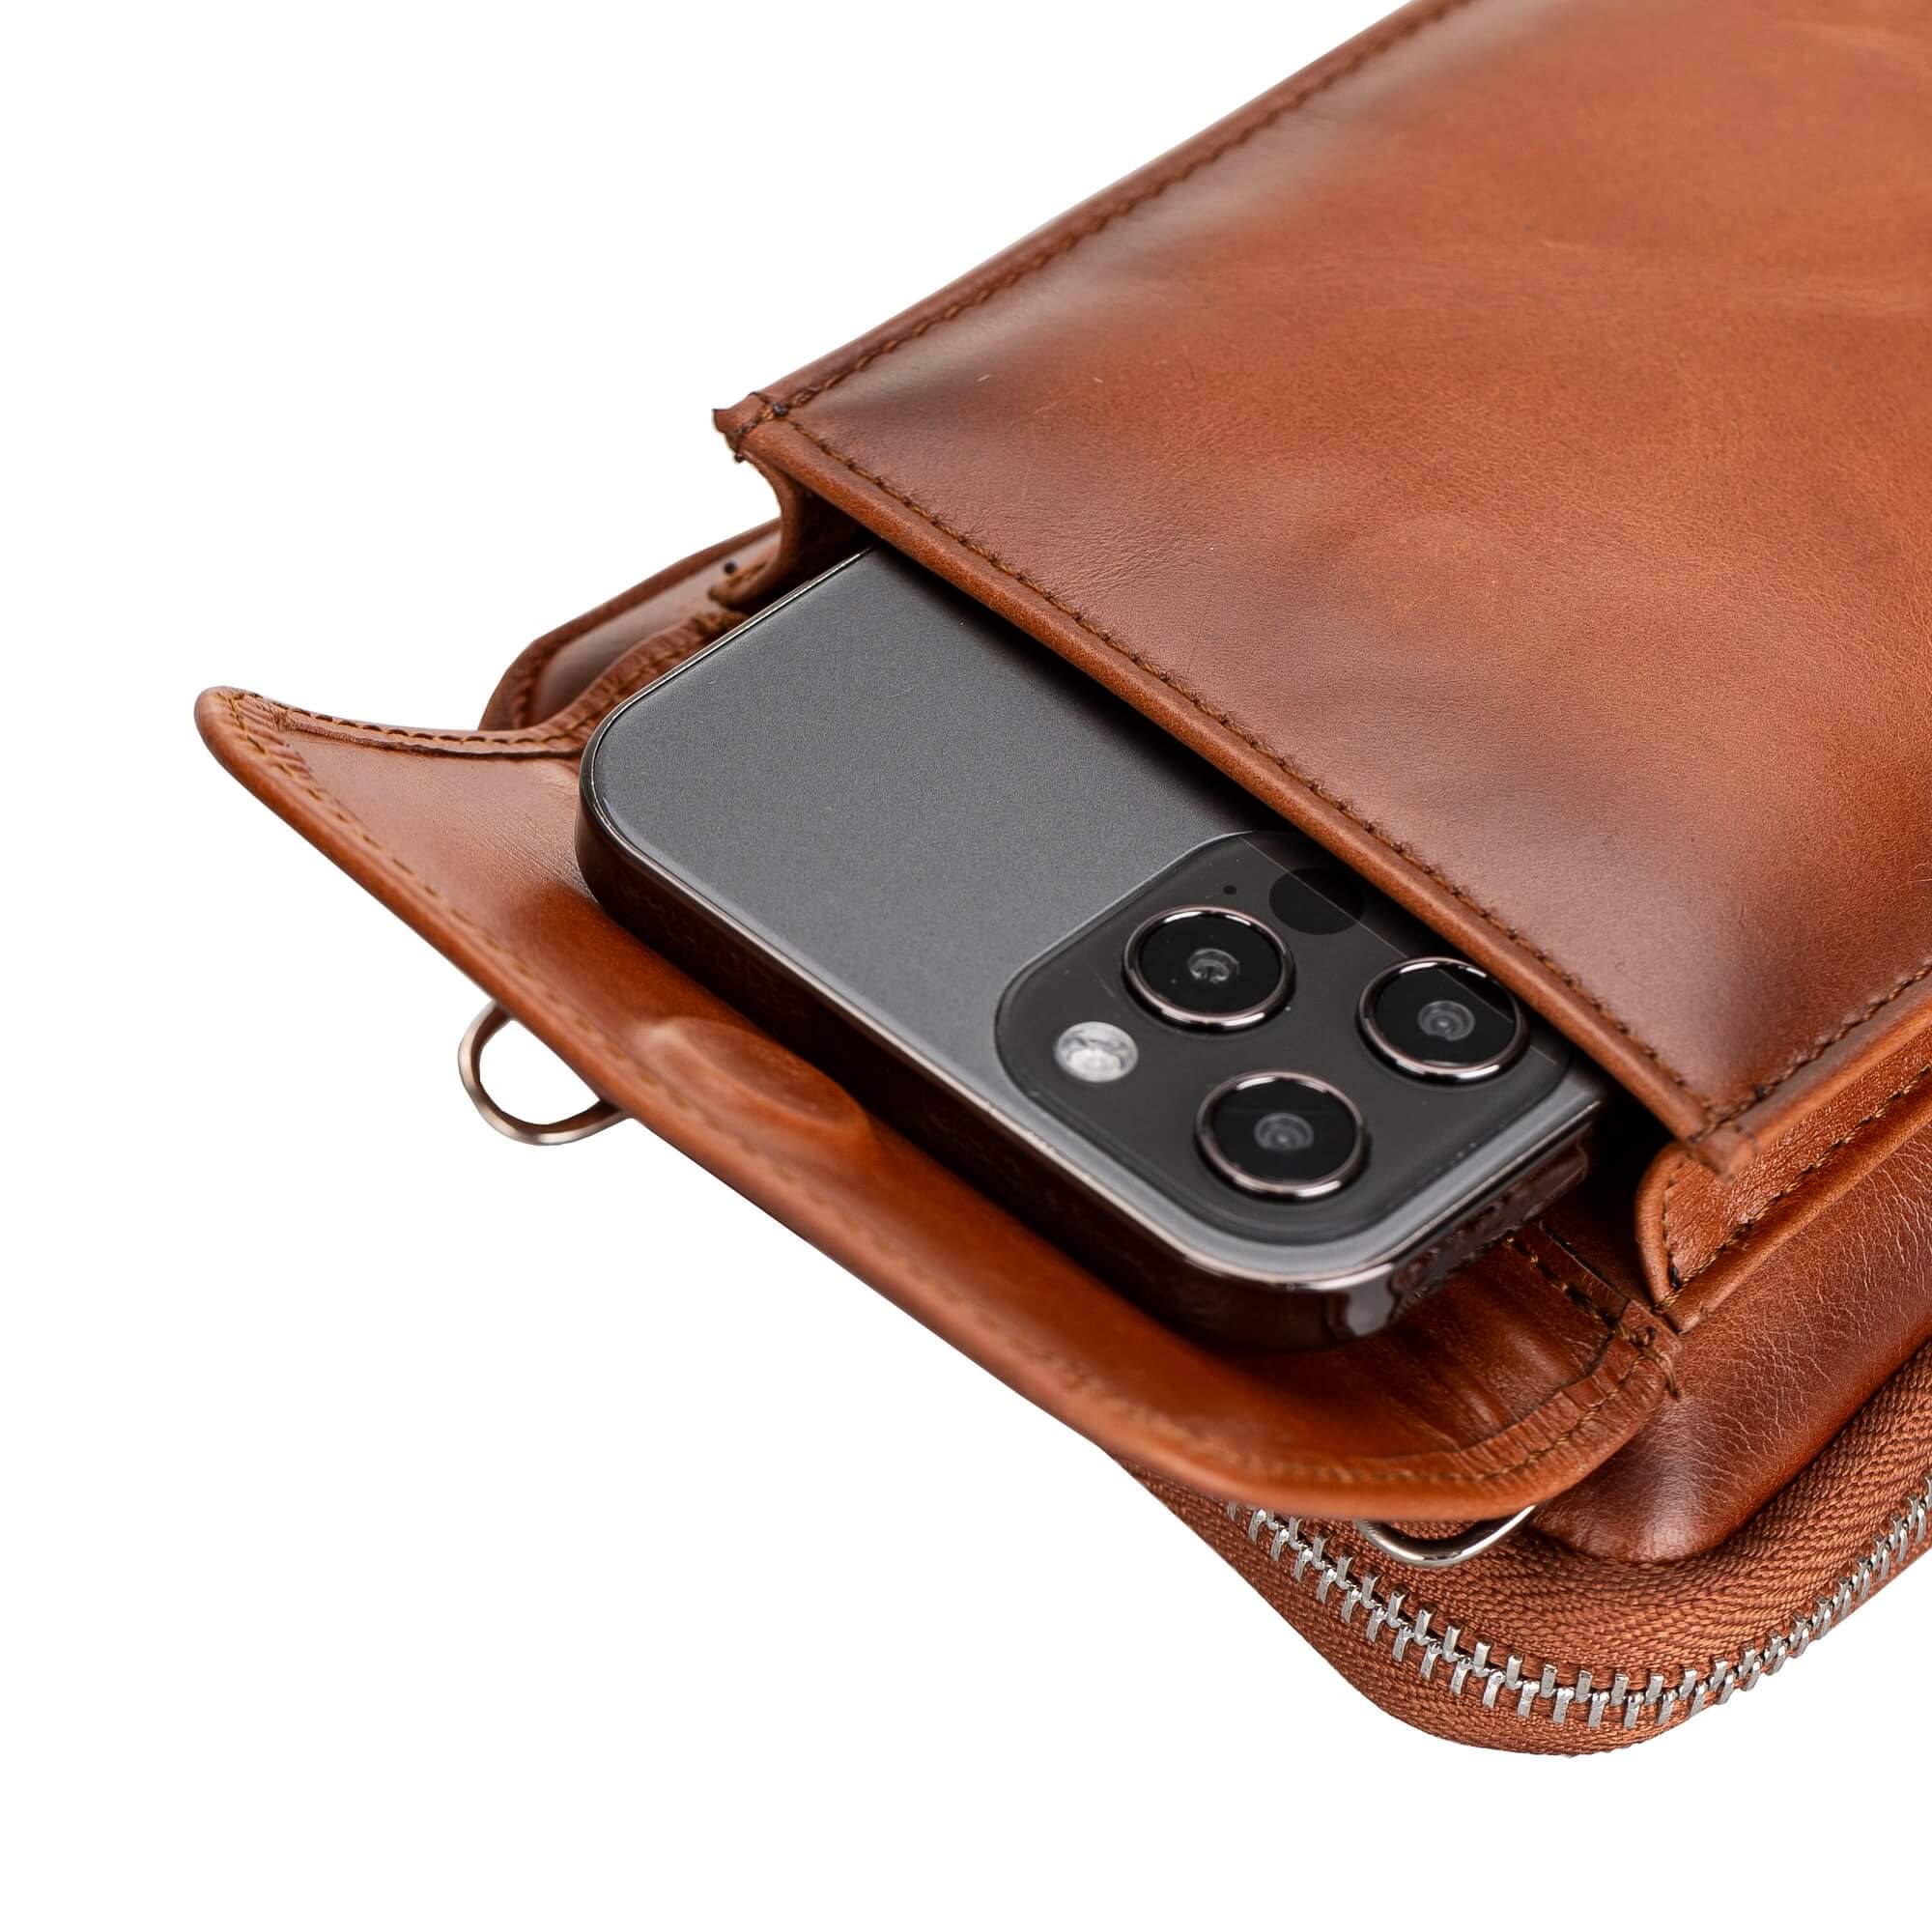 Leather Phone Wallet Purse, Leather Holding Bag, Leather Money Bag